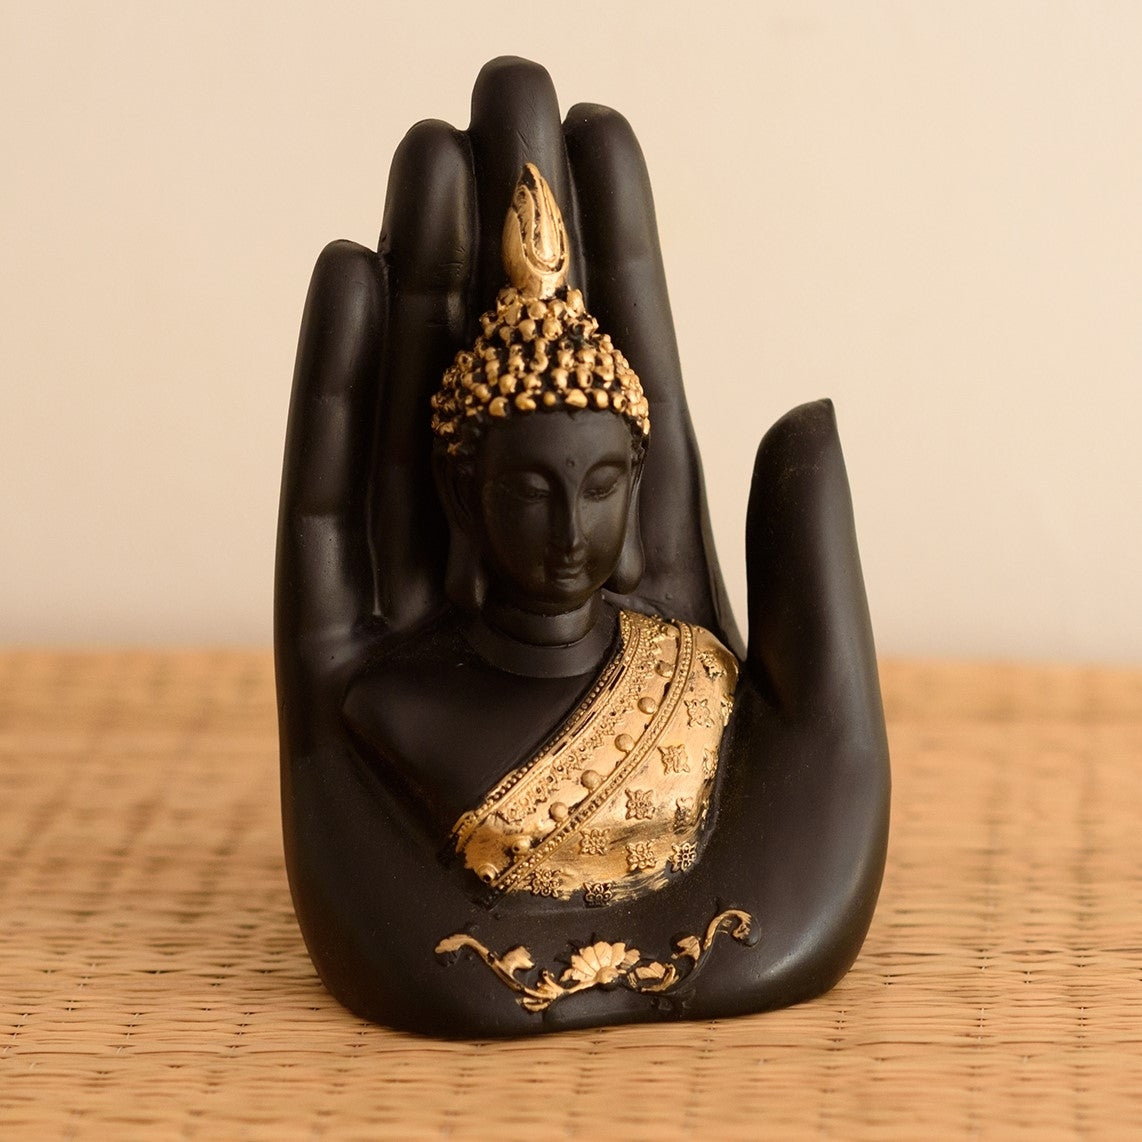 Black and Golden Handcrafted Palm Buddha Statue